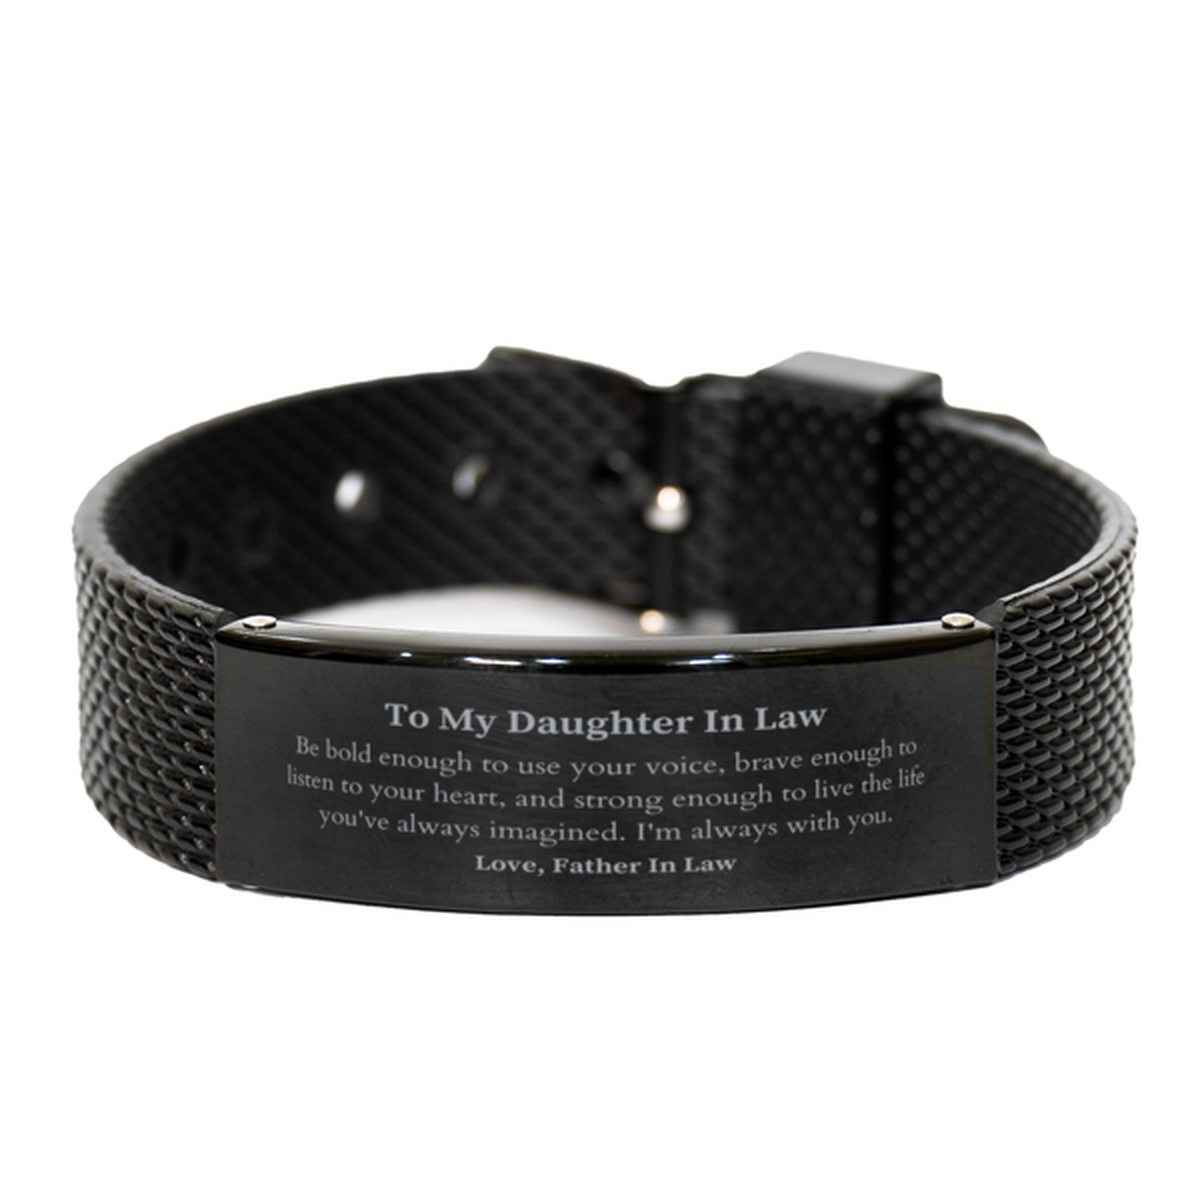 Keepsake Daughter In Law Black Shark Mesh Bracelet Gift Idea Graduation Christmas Birthday Daughter In Law from Father In Law, Daughter In Law Be bold enough to use your voice, brave enough to listen to your heart. Love, Father In Law